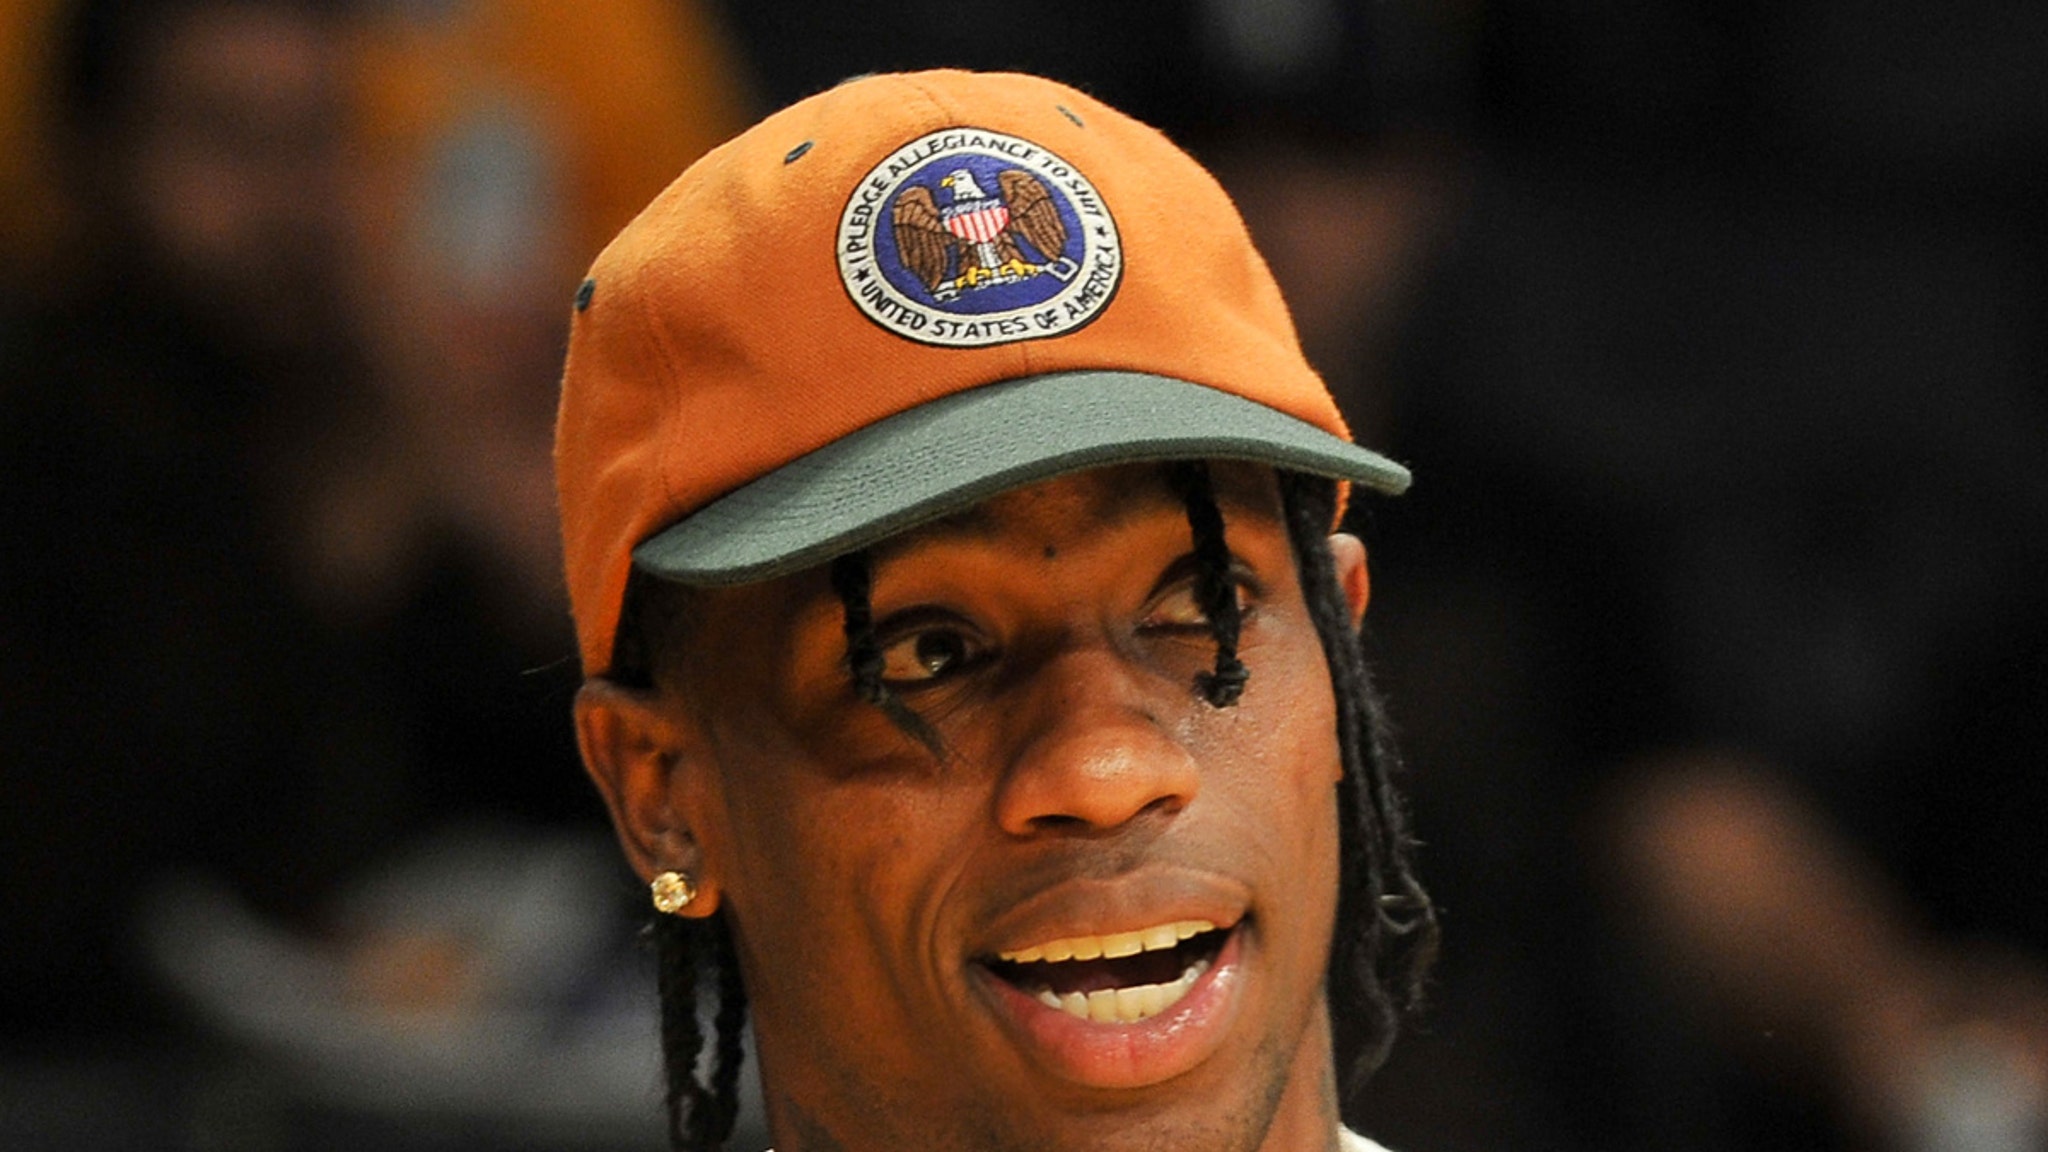 Travis Scott Unaware of Seriousness of Astroworld Chaos